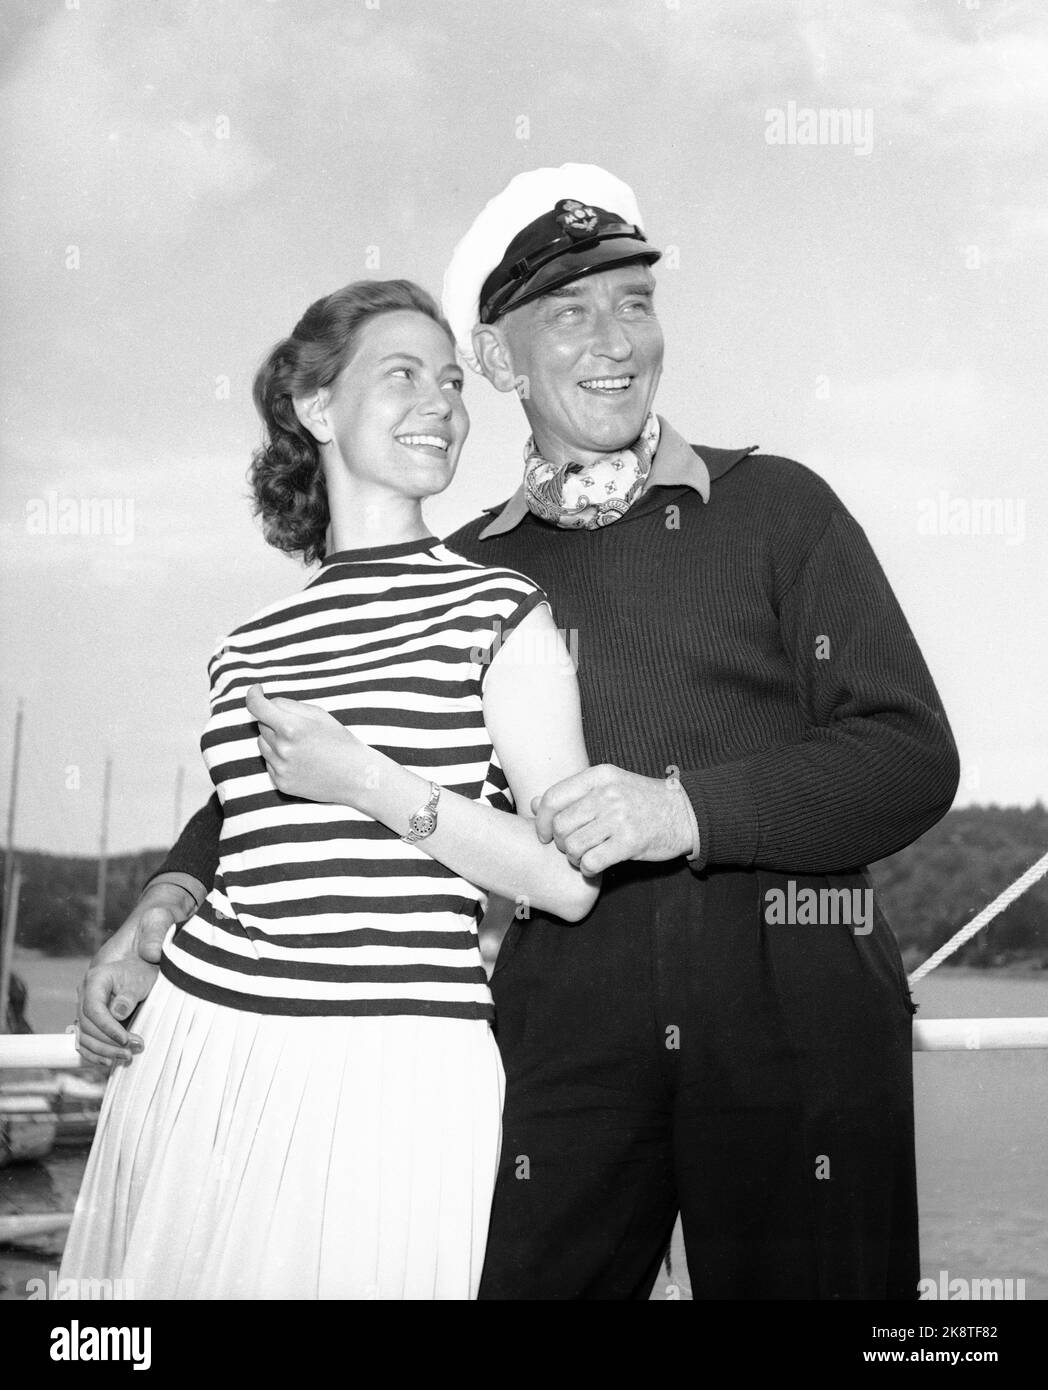 Hankø in the summer of 1956. Recording Norway's first feature film in color, titled "Smugglers in tuxedo". Here Anne Lise Tangstad who plays "Eva" and Lauritz Falk who plays Swedish smuggler (director Arne Dahlin) who runs her business in the shelter of the regatta. Photo: Aage Storløkken / Current / NTB. Physical Lok: Current 1956 No. 30: Smugglers in tuxedo. Stock Photo